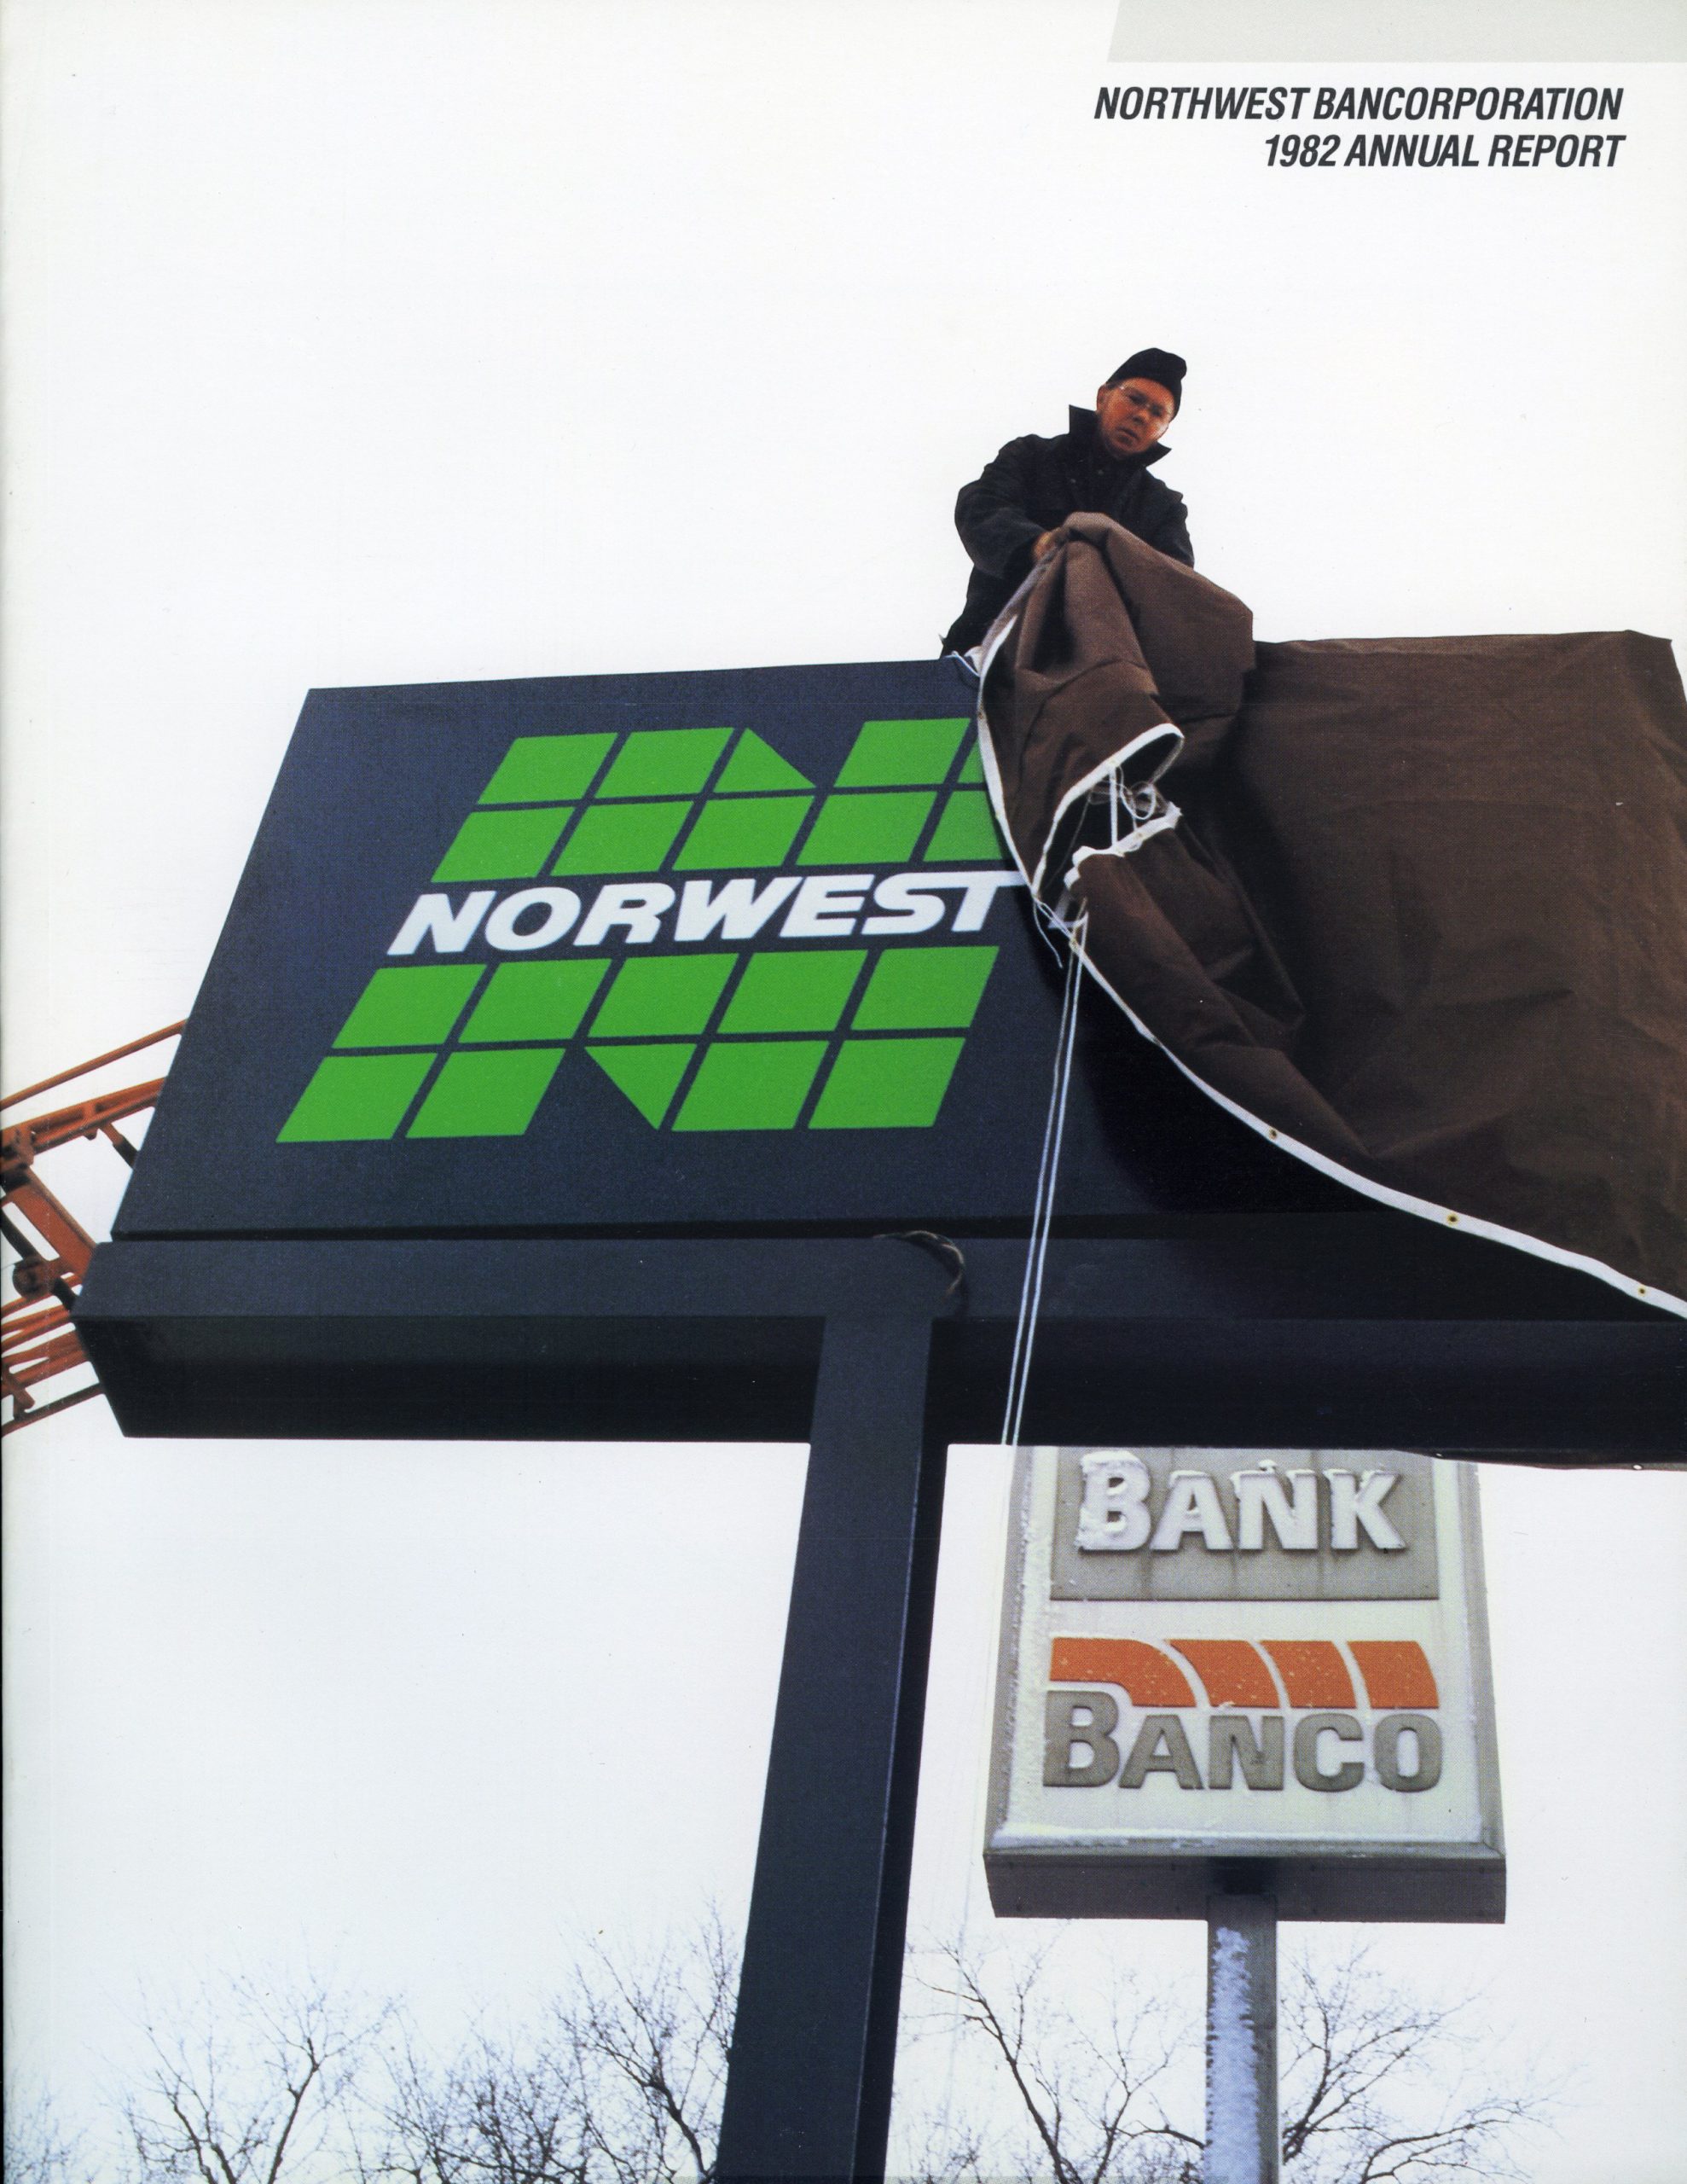 Magazine cover reads Northwest Bancorporation 1982 Annual Report. Shows man removing cover from a newly installed sign that reads Norwest in a big green letter N. In background is retired brown sign reading Banco